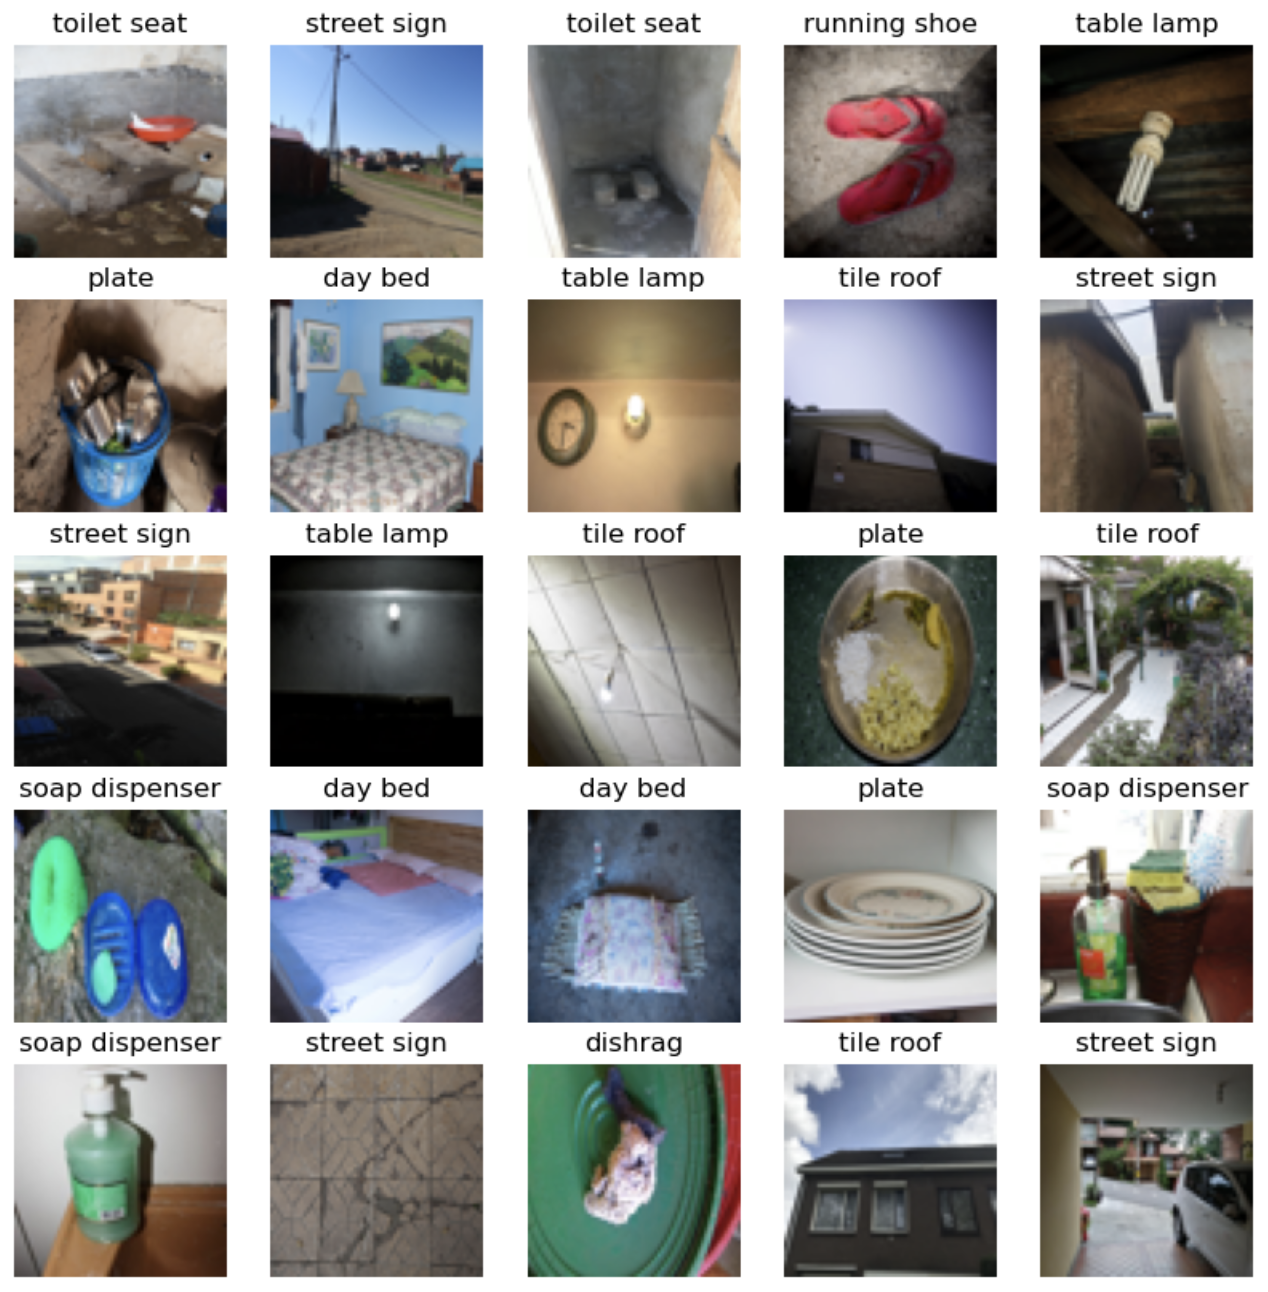 A 5 by 5 grid of 25 sample images from the dollar street 10 data-set. Each image is labelled with a category, for example: 'street sign' or 'soap dispenser'.